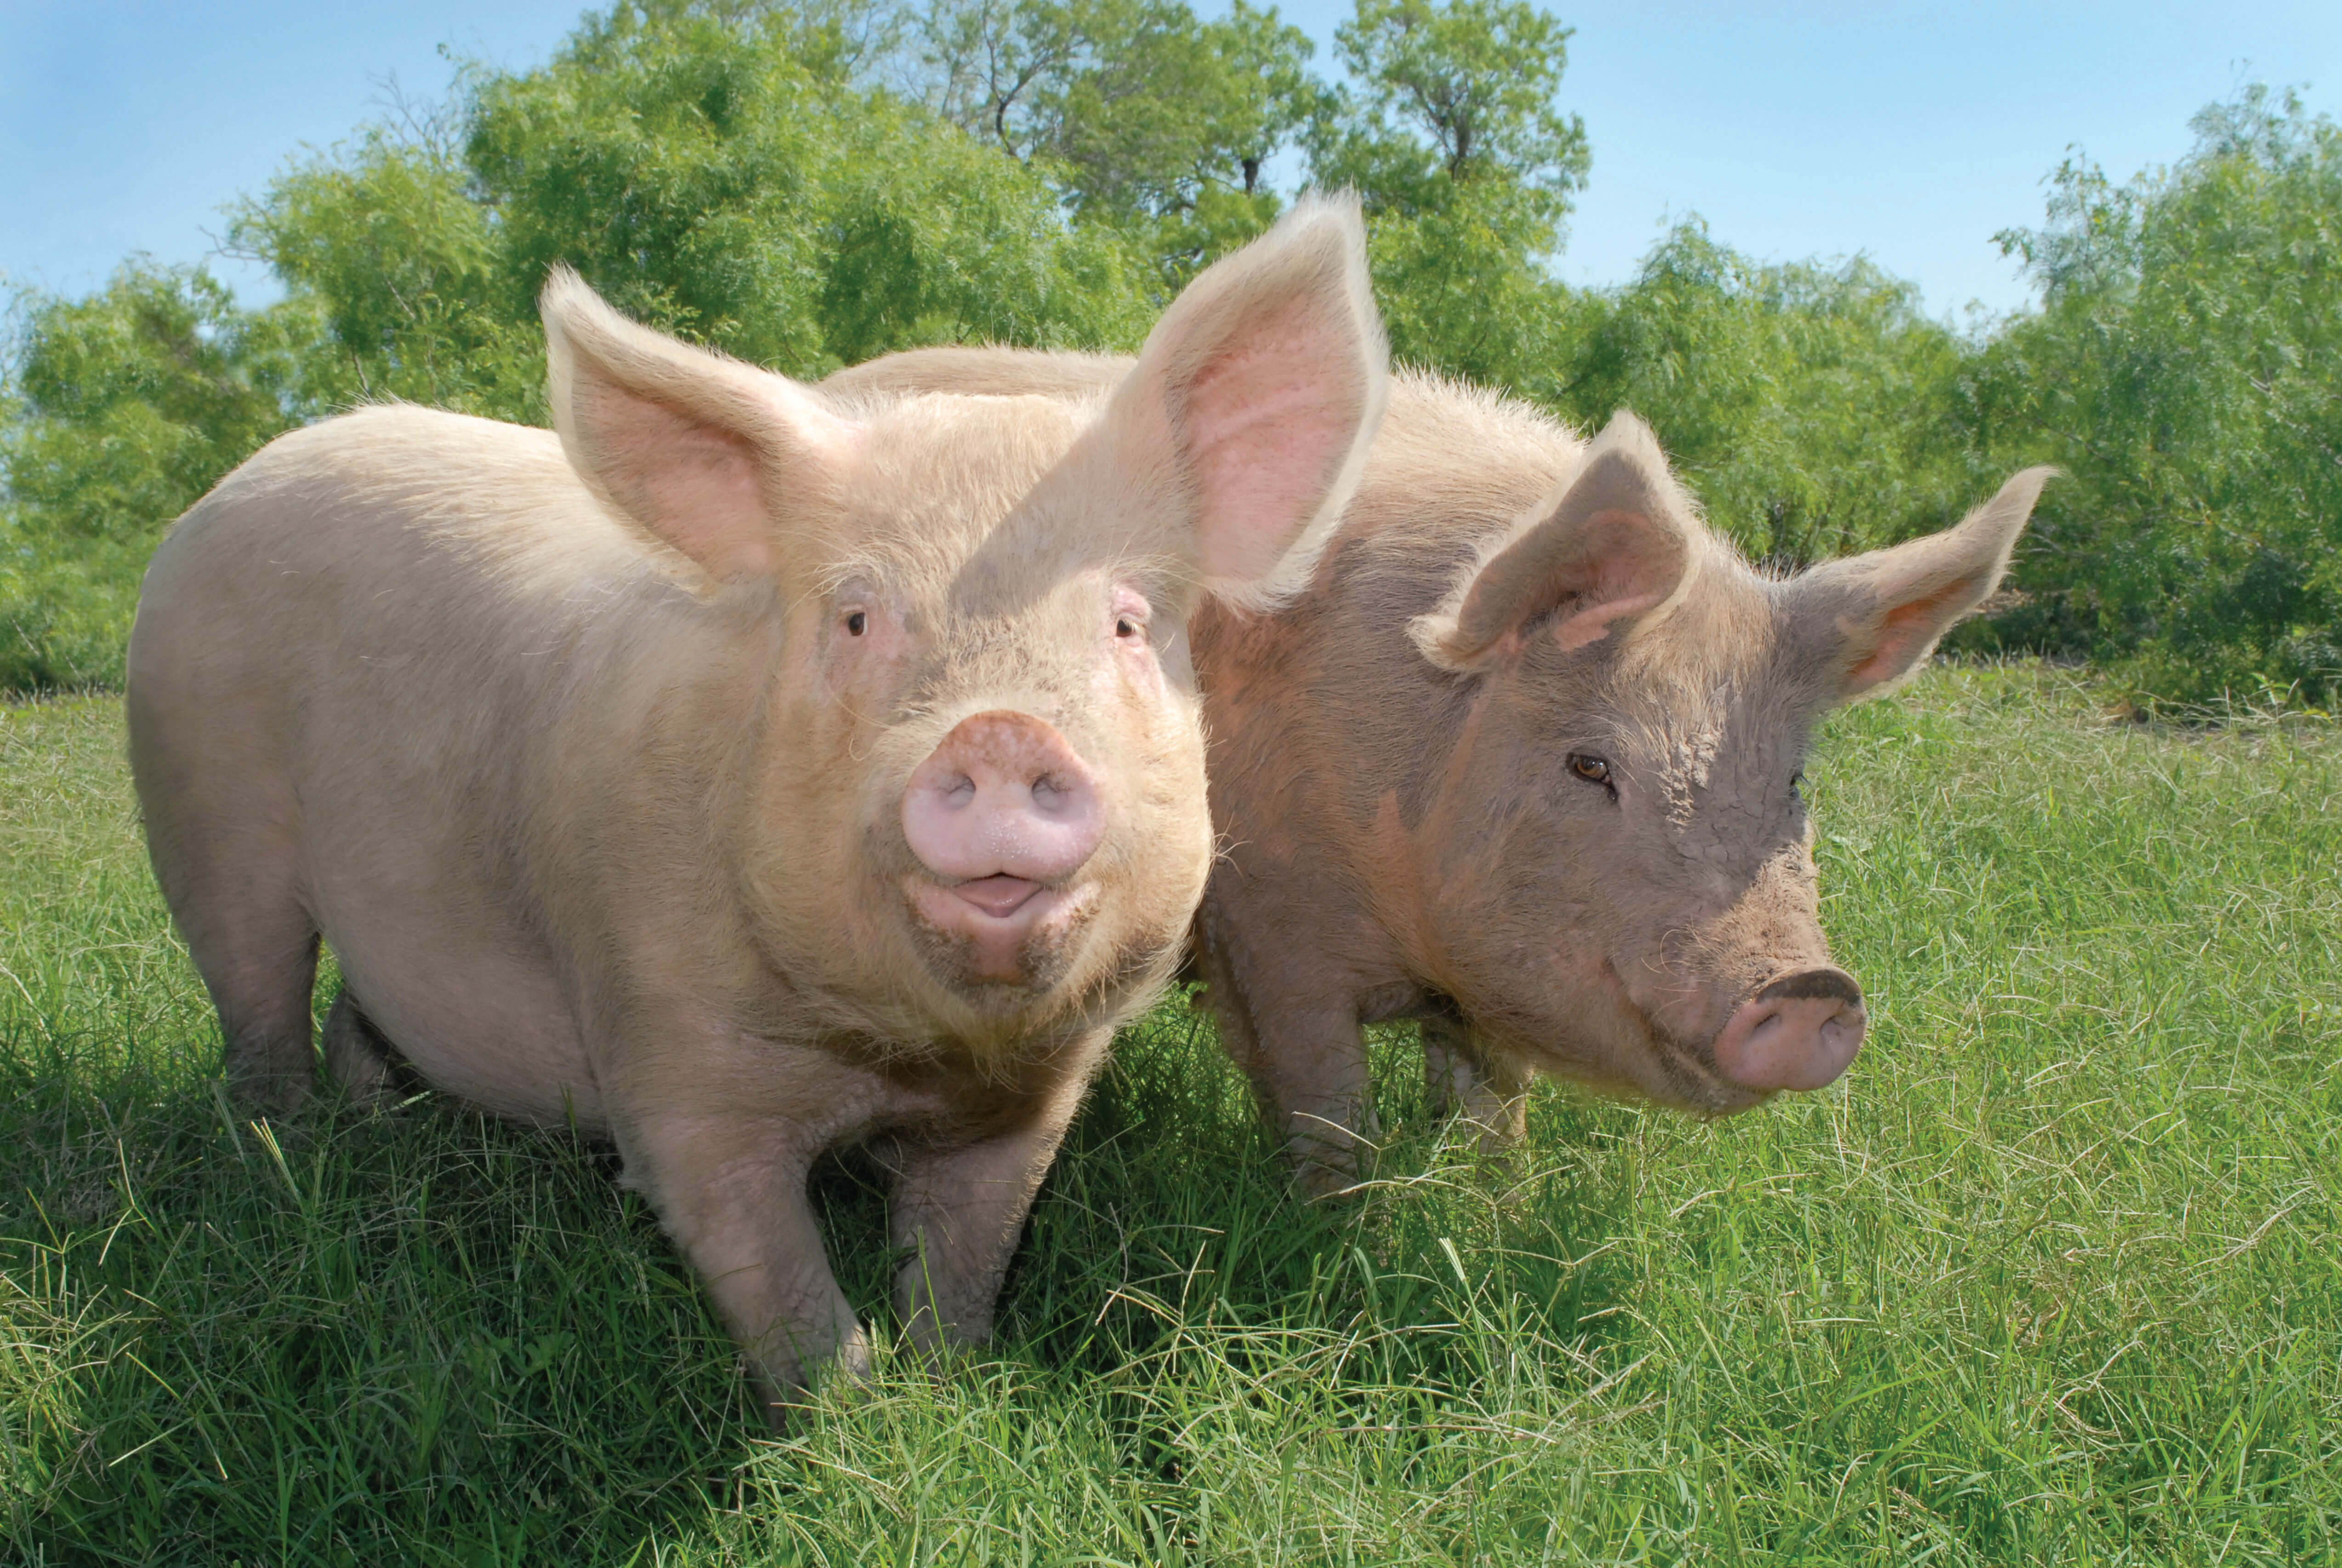 Pig Farmer Agrees, 'No Such Thing as Humane Meat' | PETA